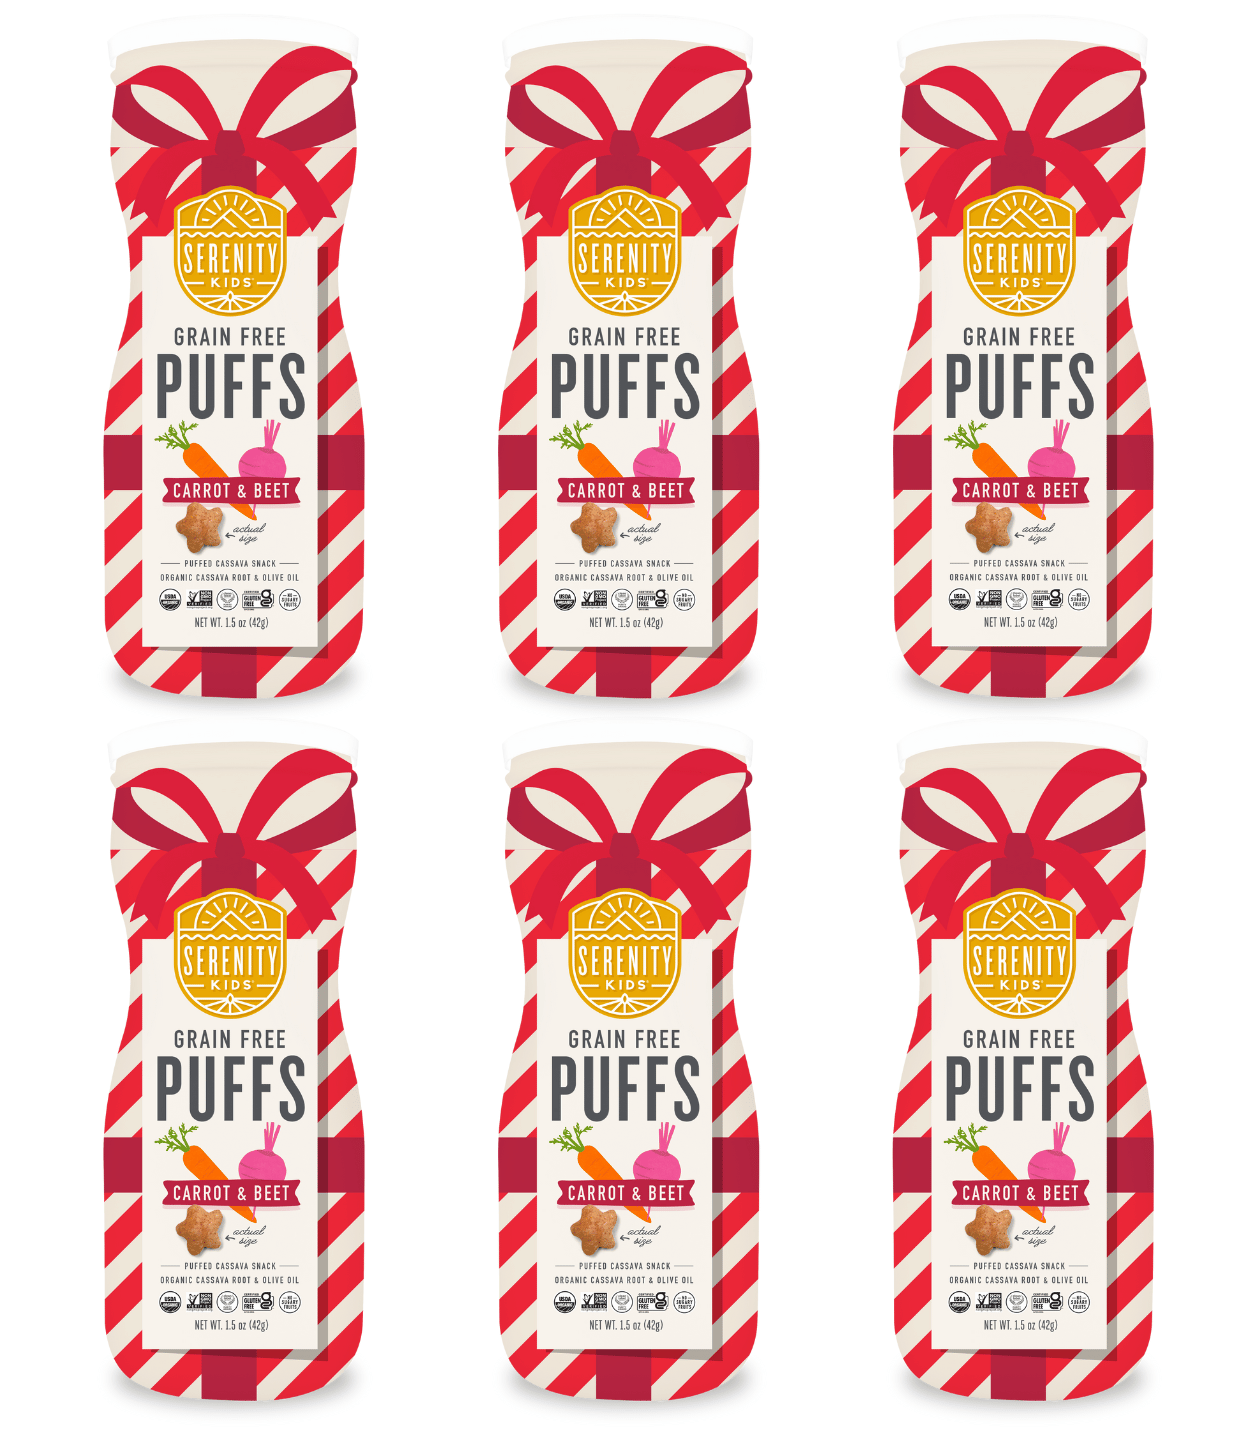 Carrot & Beet Grain Free Baby Puffs with Olive Oil<br><br> Holiday Limited Edition